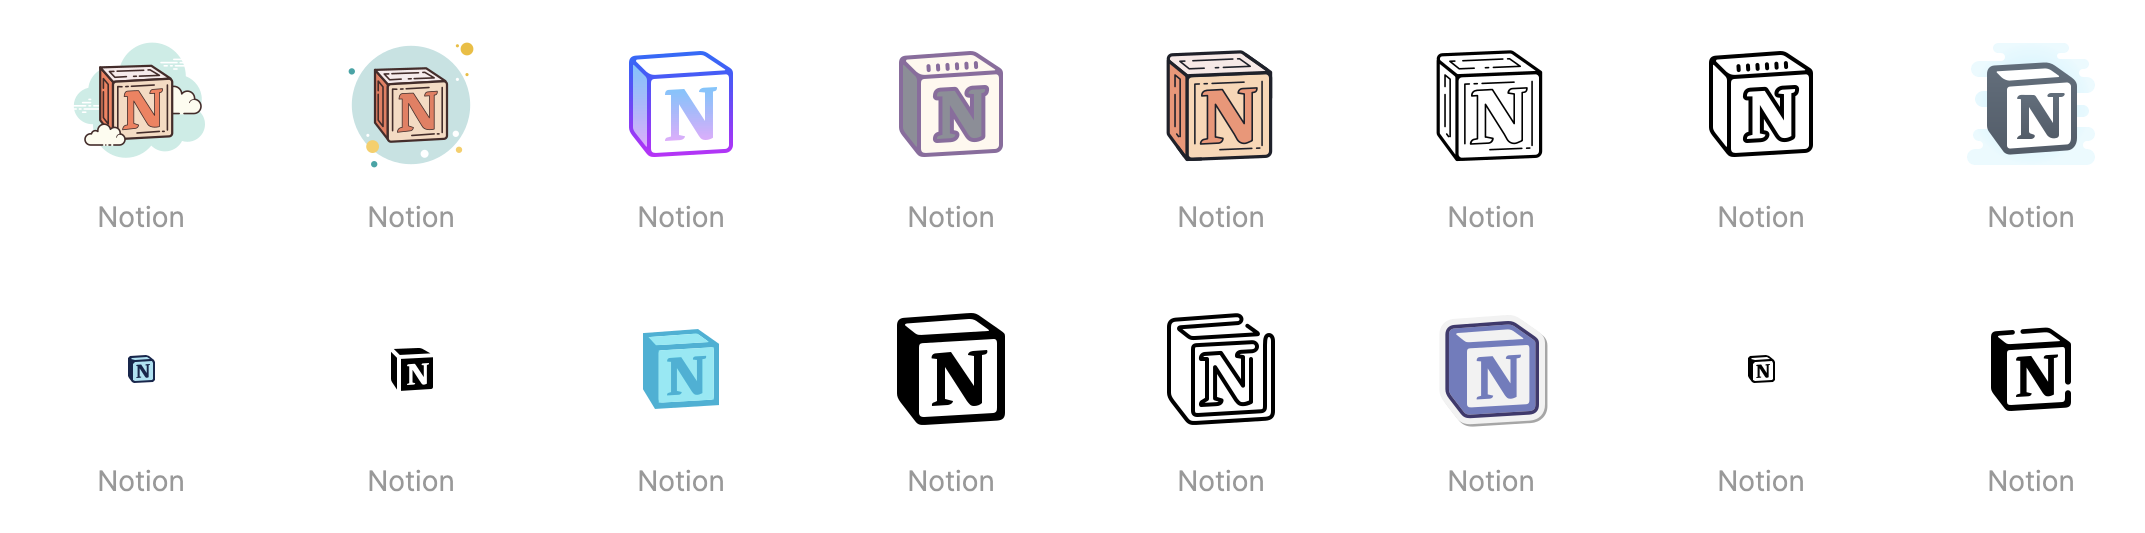 notion covers
